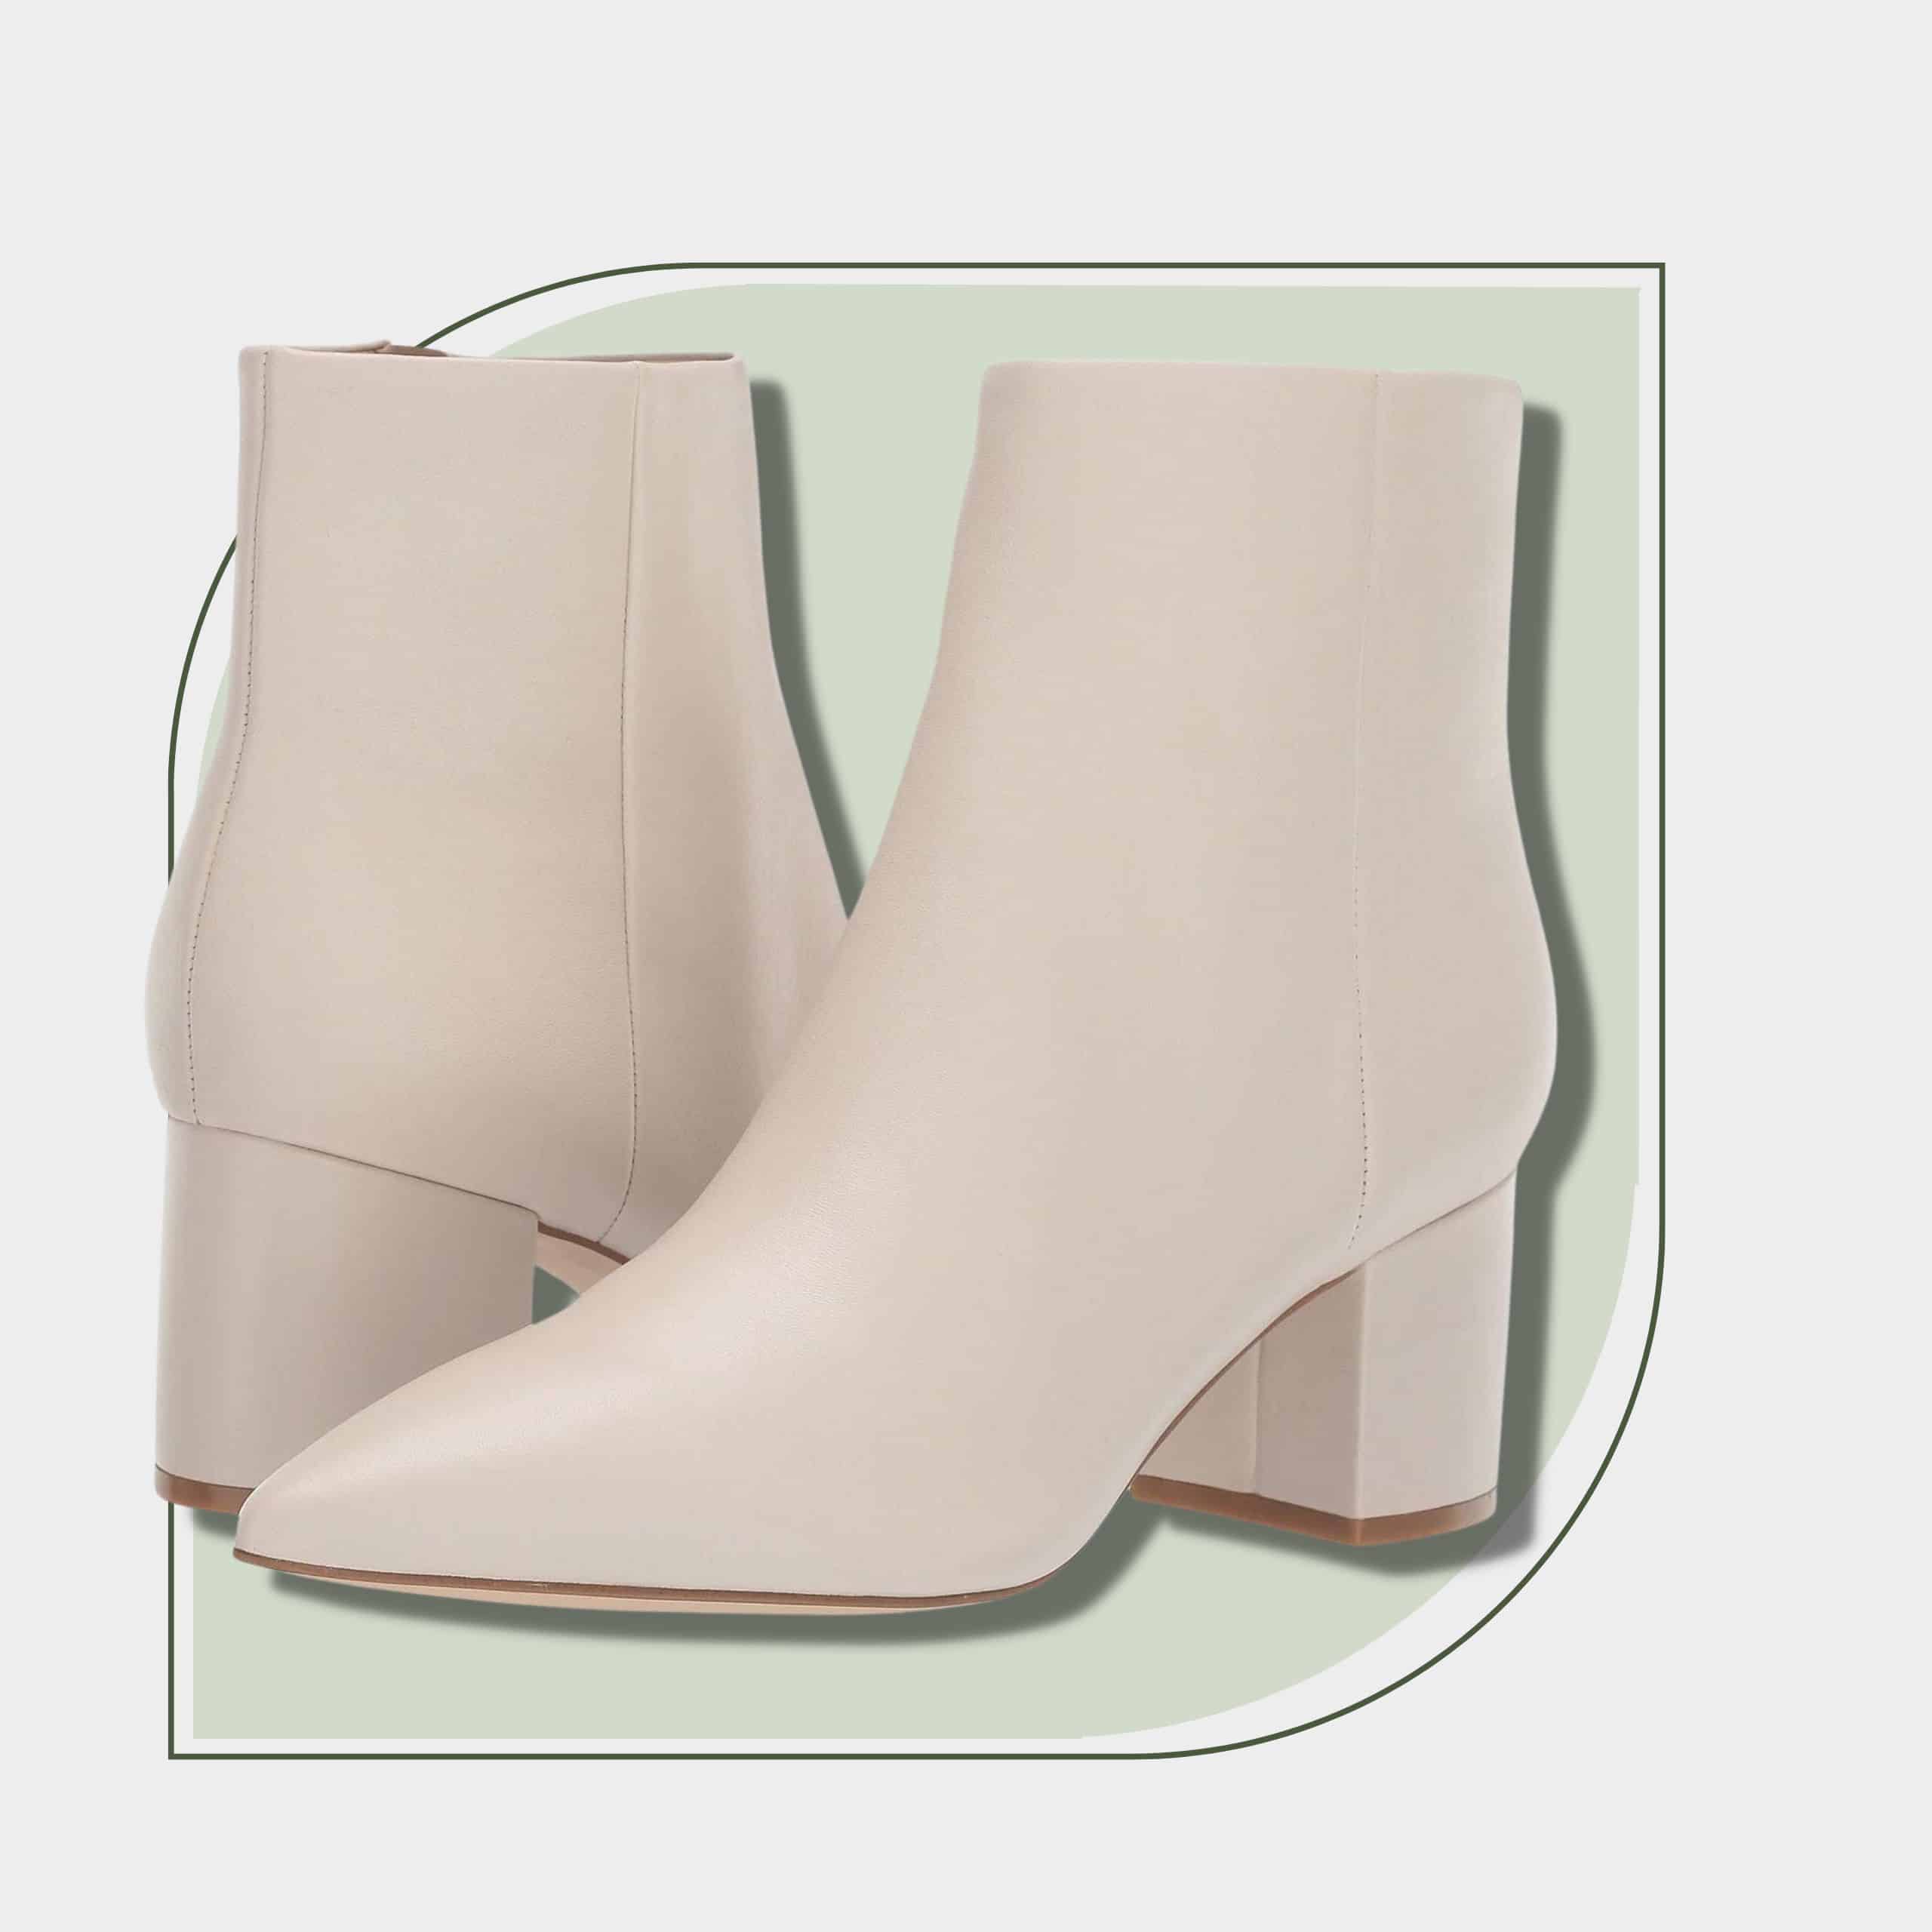 Effortless Chic Winter Capsule Wardrobe-White Ankle Boots